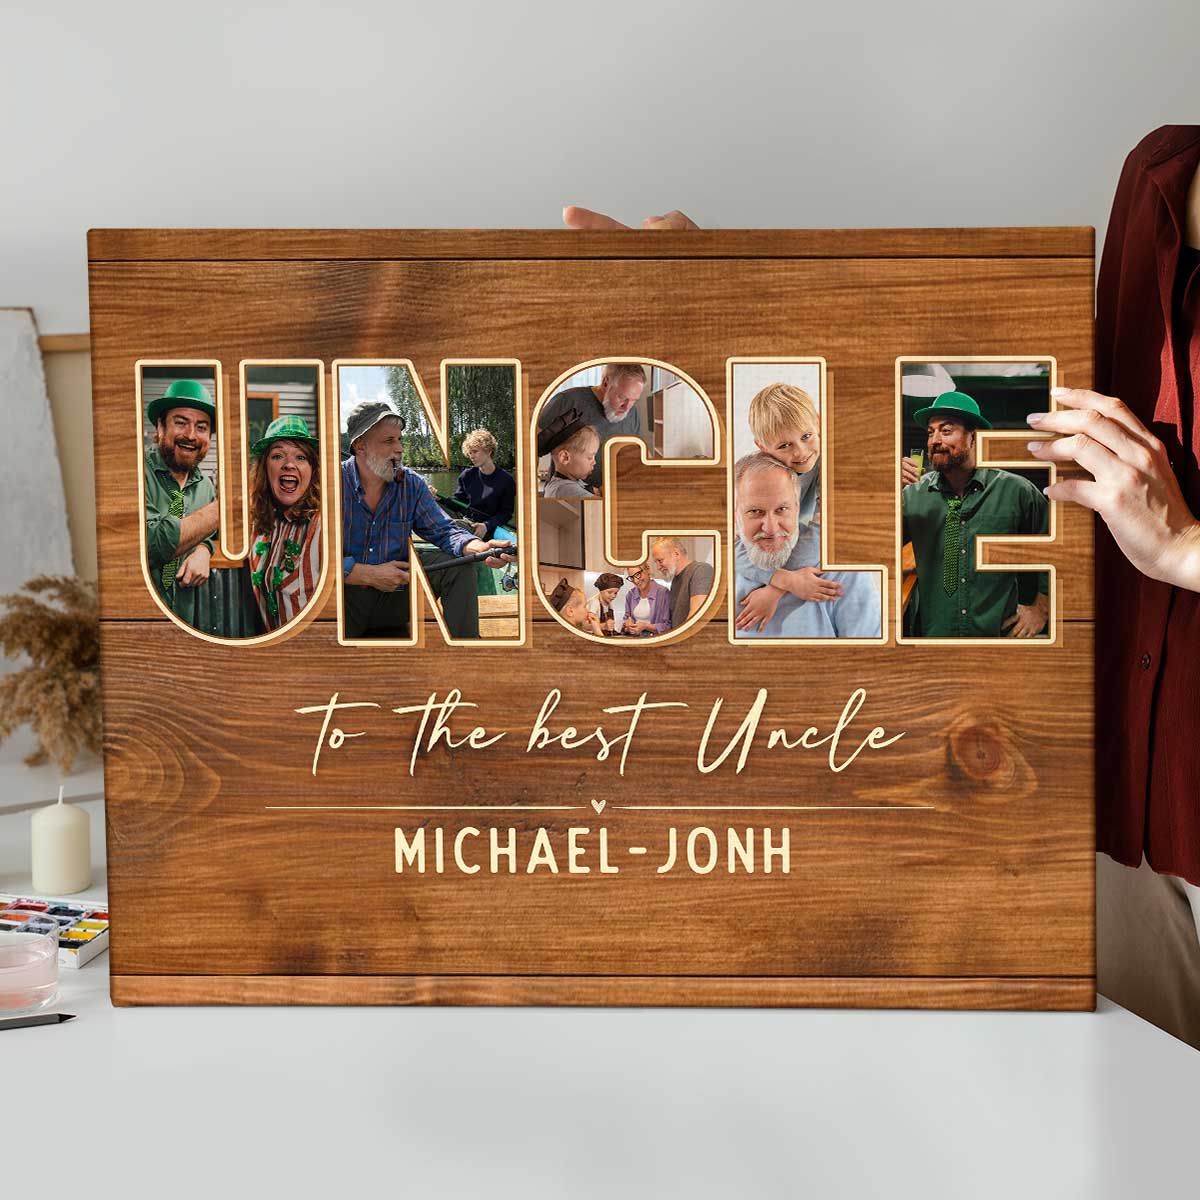 Father's Day Gifts for Uncles | Uncle gifts, Cheap fathers day gifts, Cool  fathers day gifts